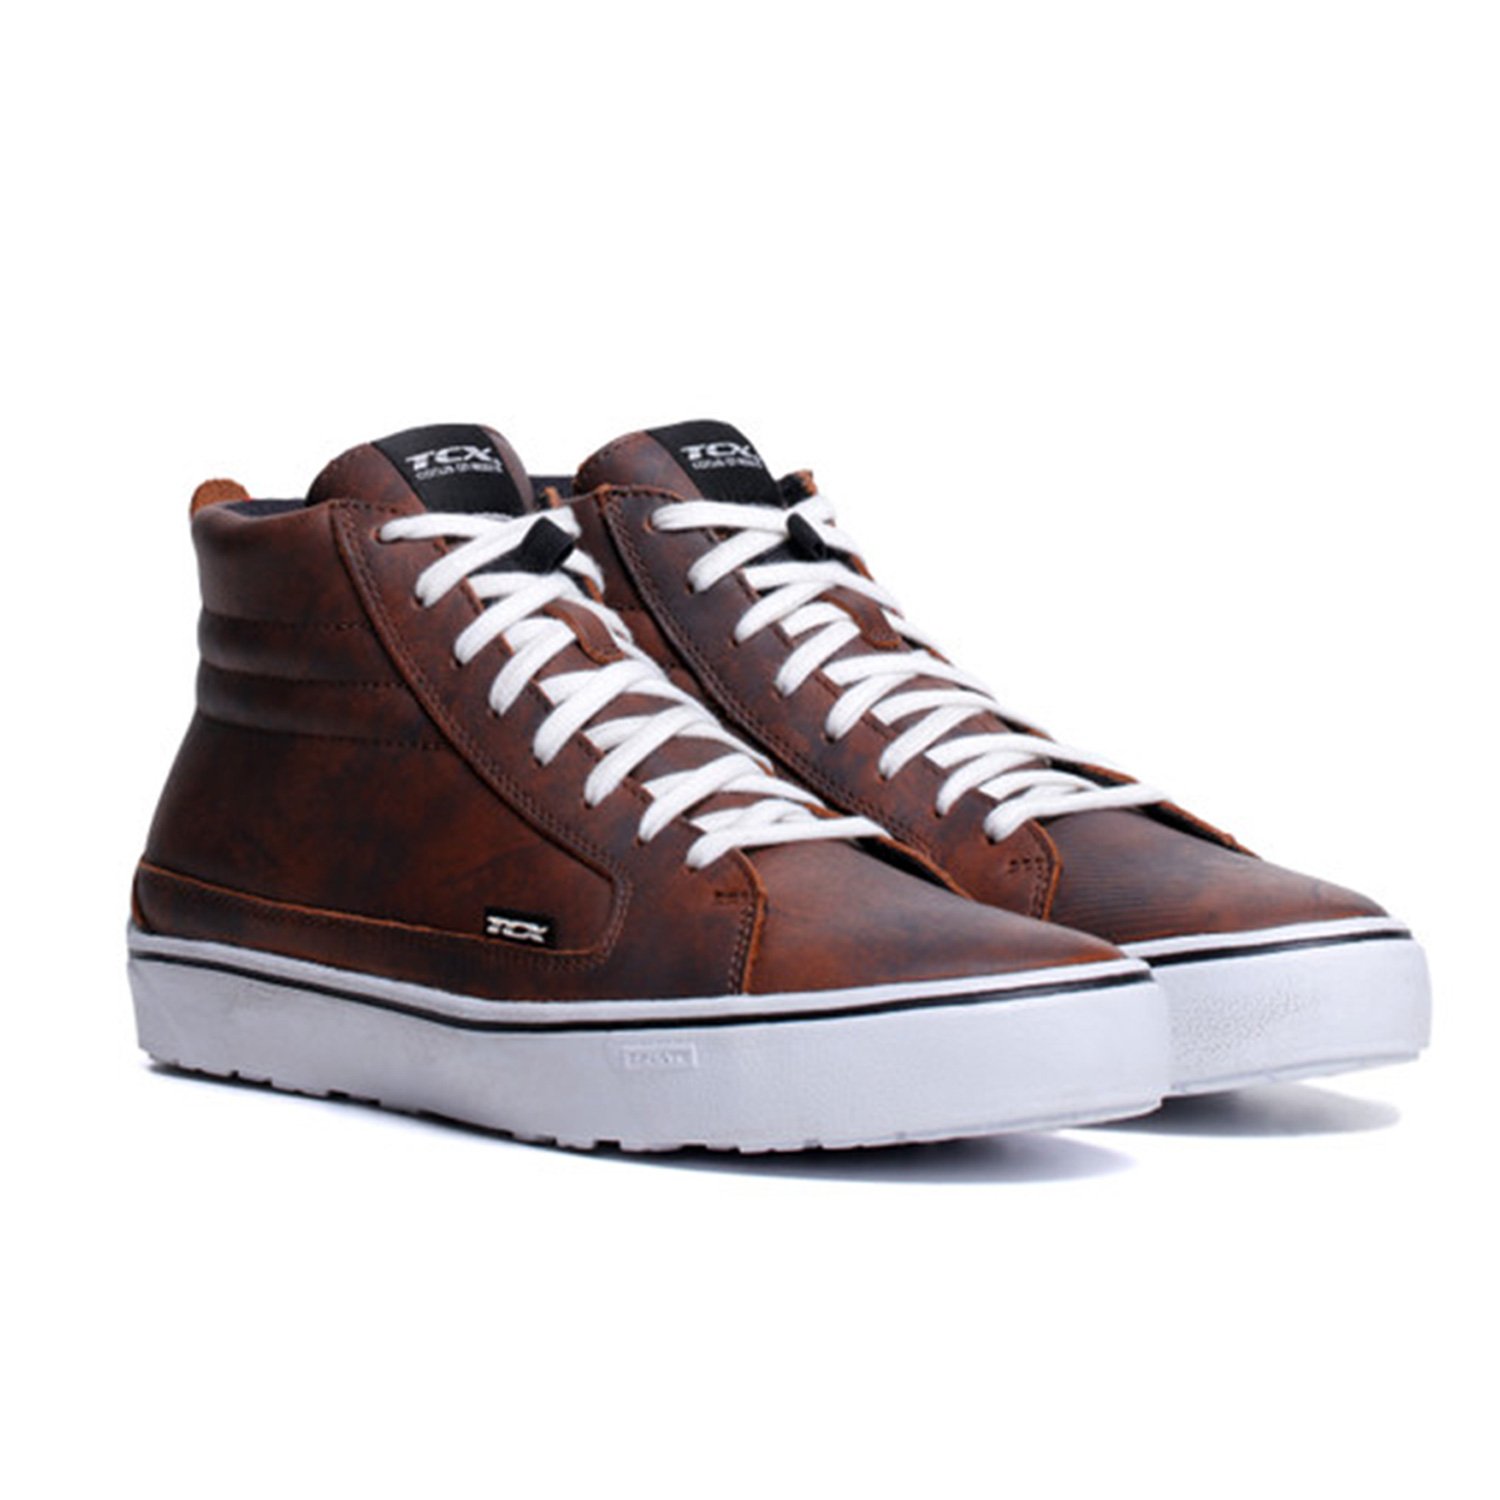 Image of TCX Street 3 WP Marron Blanc Chaussures Taille 43